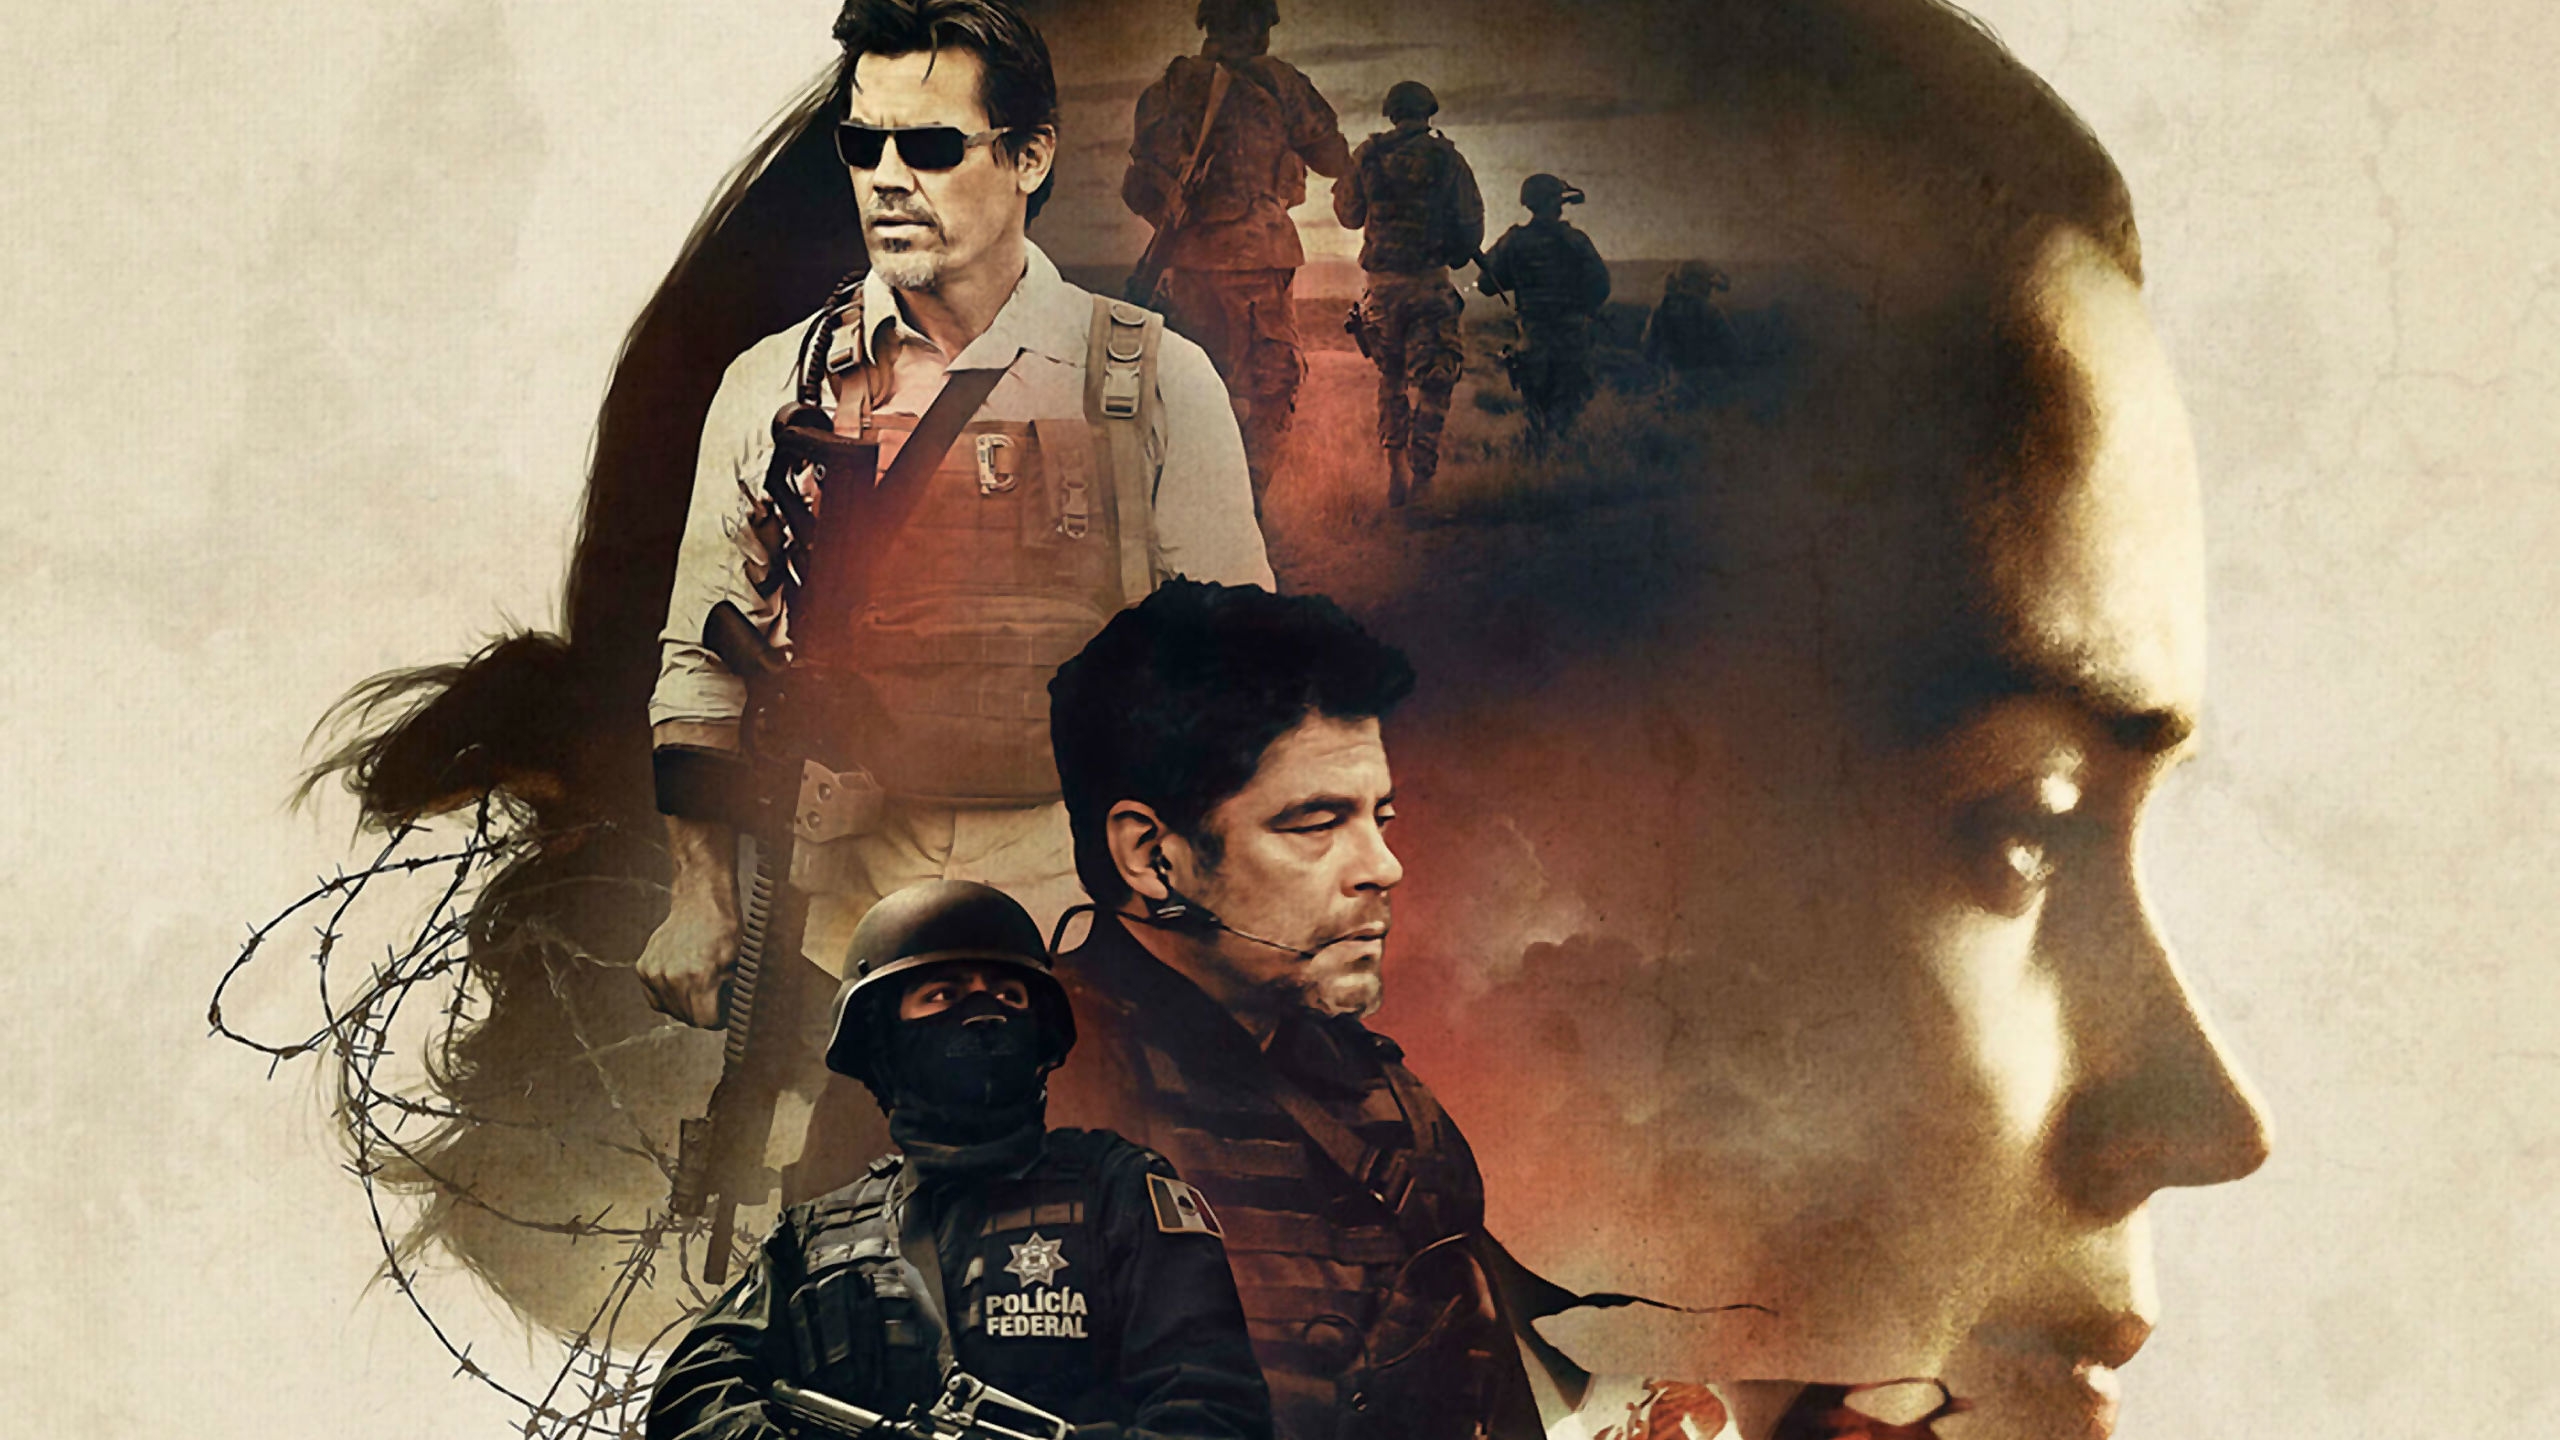 Sicario Movie Poster for 2560x1440 HDTV resolution